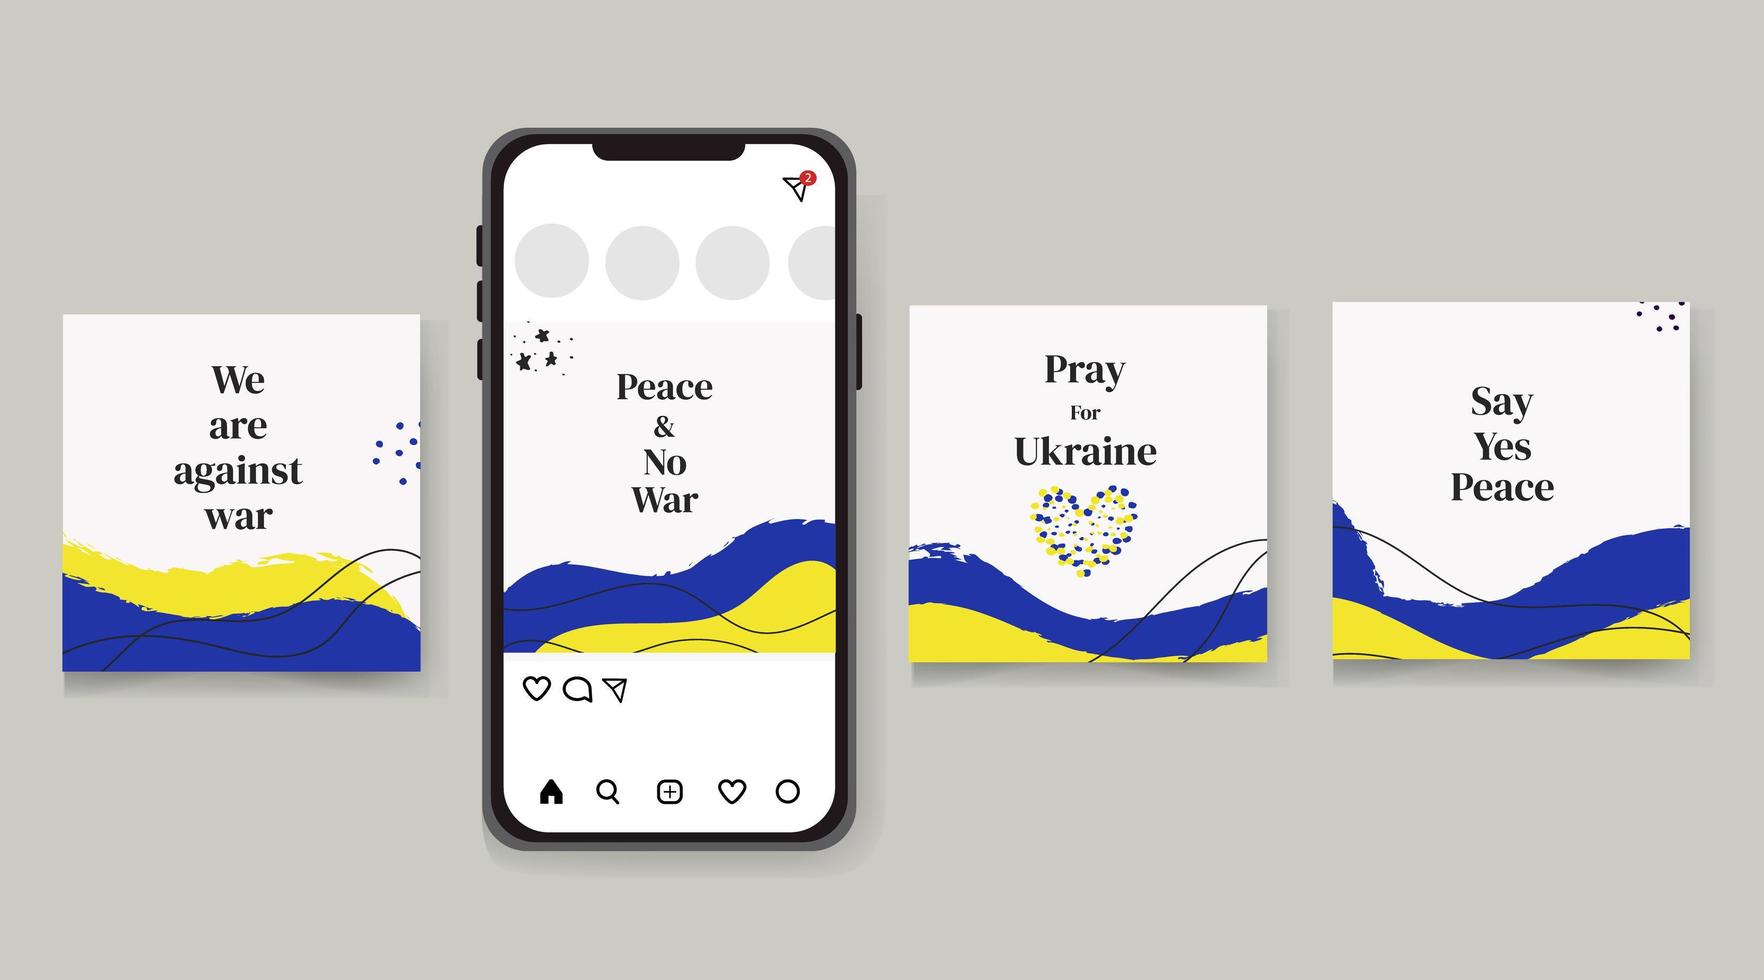 Vector illustration of a phone with messages or banners we are against the war, let's pray for Ukraine, say yes to the world. It can be used on posters, flyers, signage, web banners, etc.